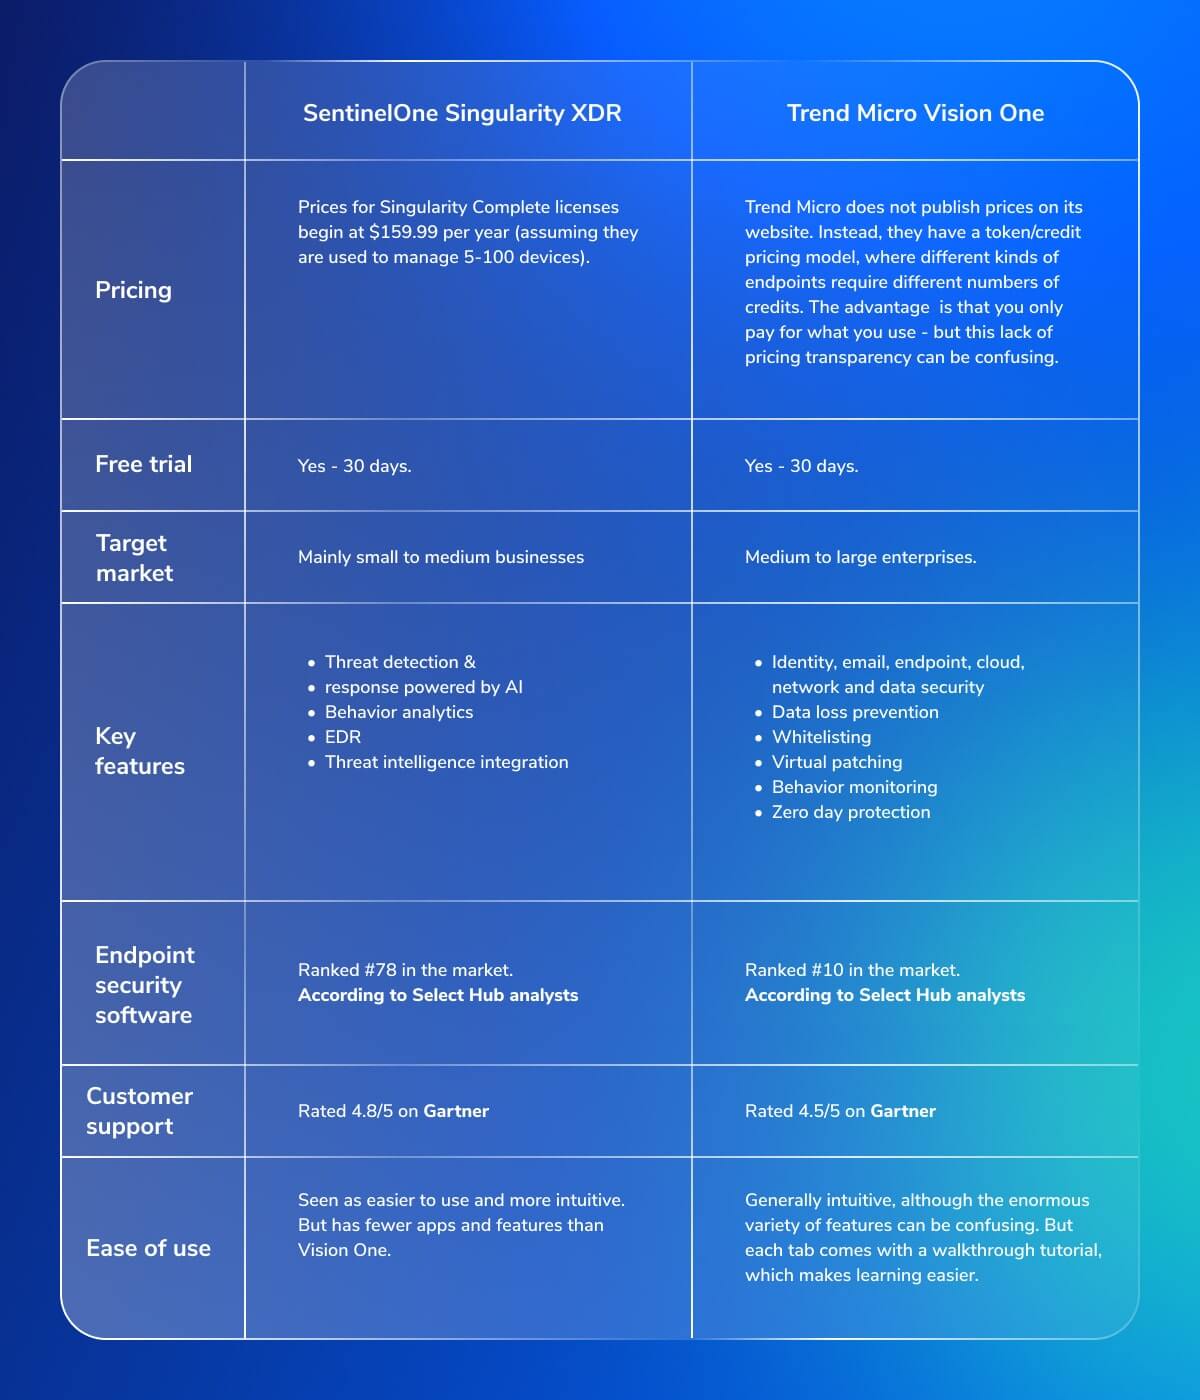 Comparison chart showcasing pricing, key features, target market, and customer support ratings for SentinelOne Singularity XDR and Trend Micro Vision One endpoint security software.